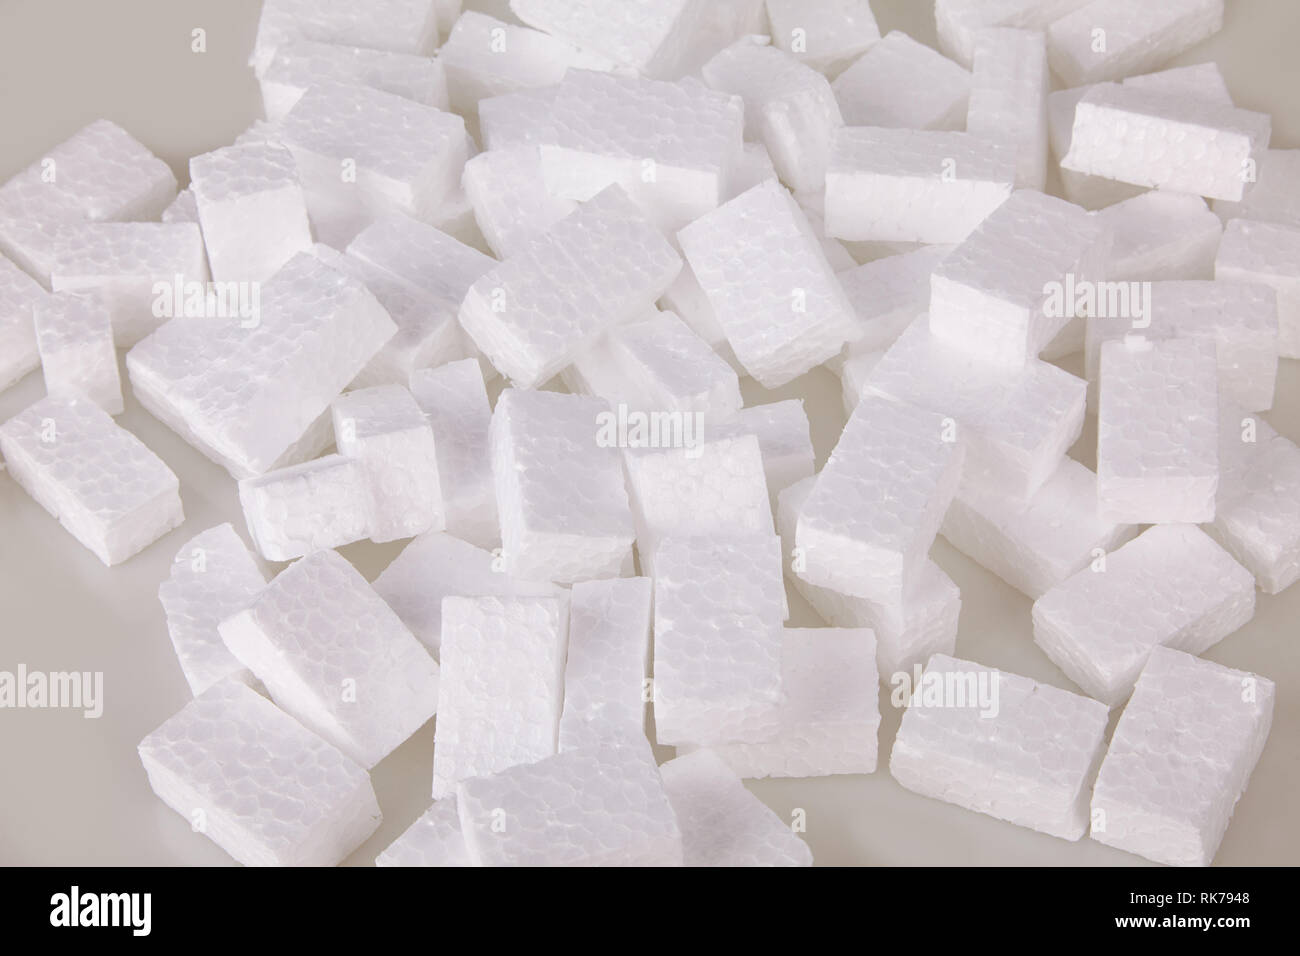 Filler packing background. Packaging foam pellets texture, top view, close-up. Polystyrene, white styrofoam packing peanuts used to prevent damage to Stock Photo